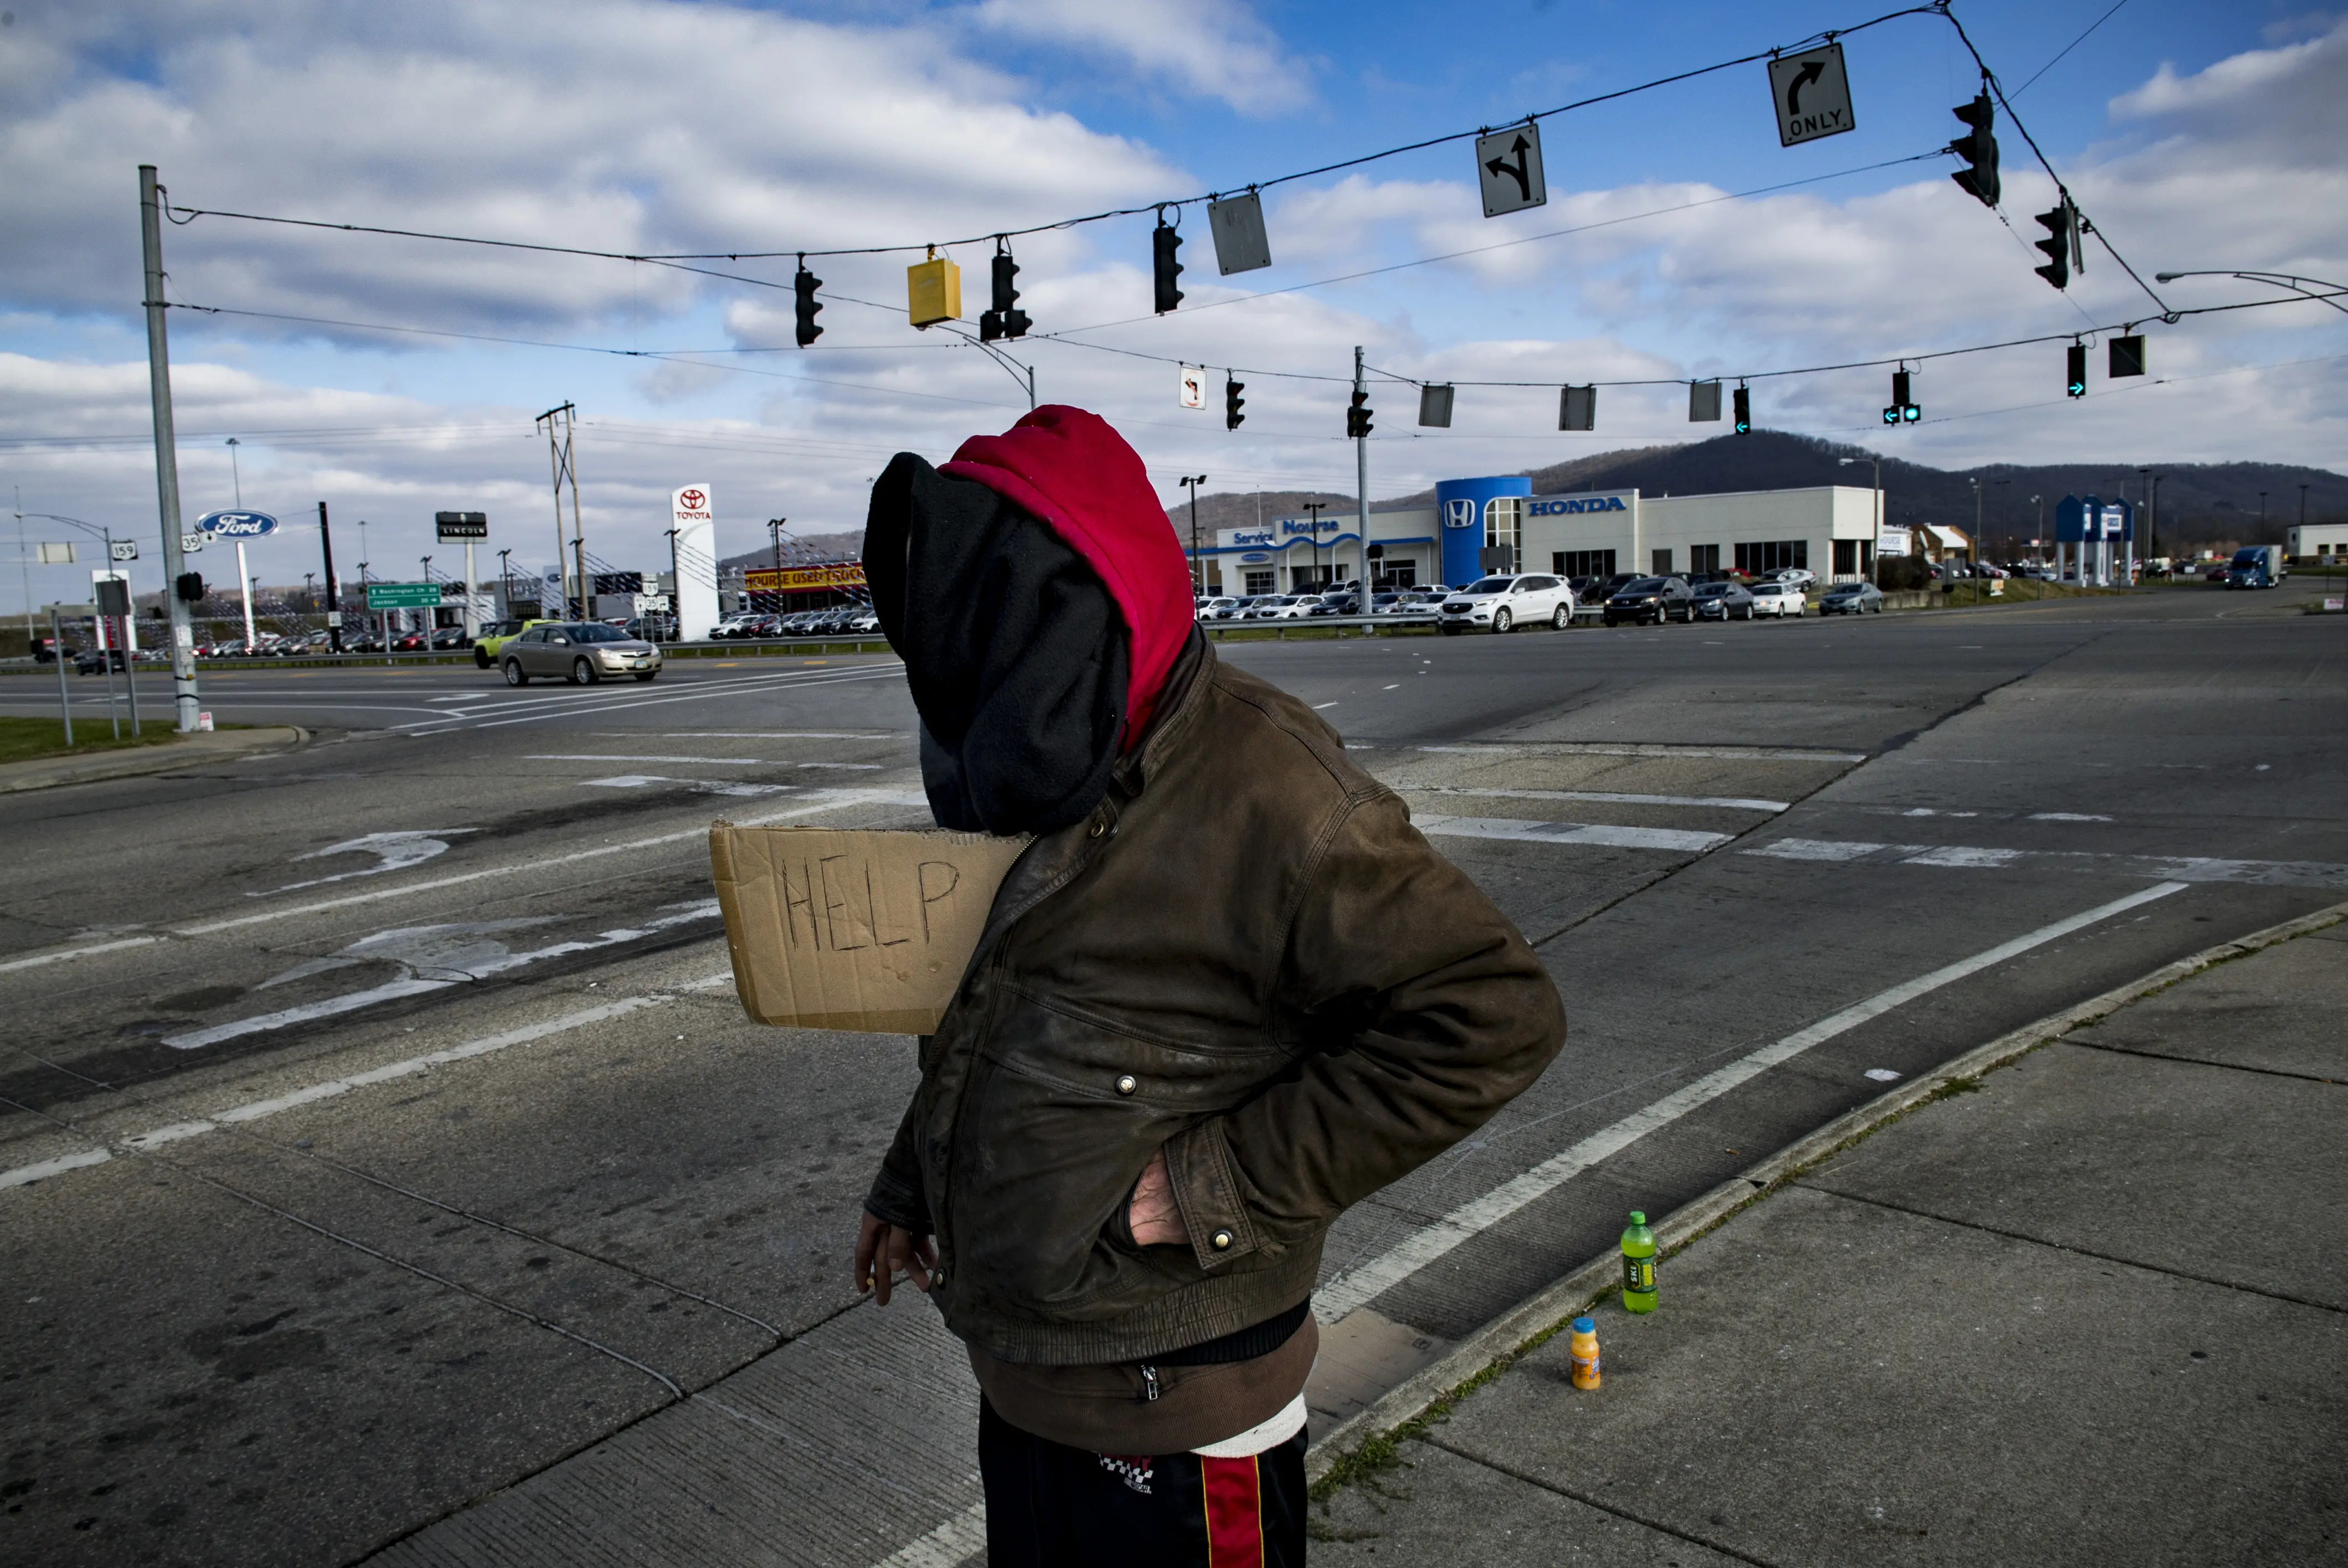 A man, whose face is covered by a black garment, stands at an intersection with a cardboard help sign.